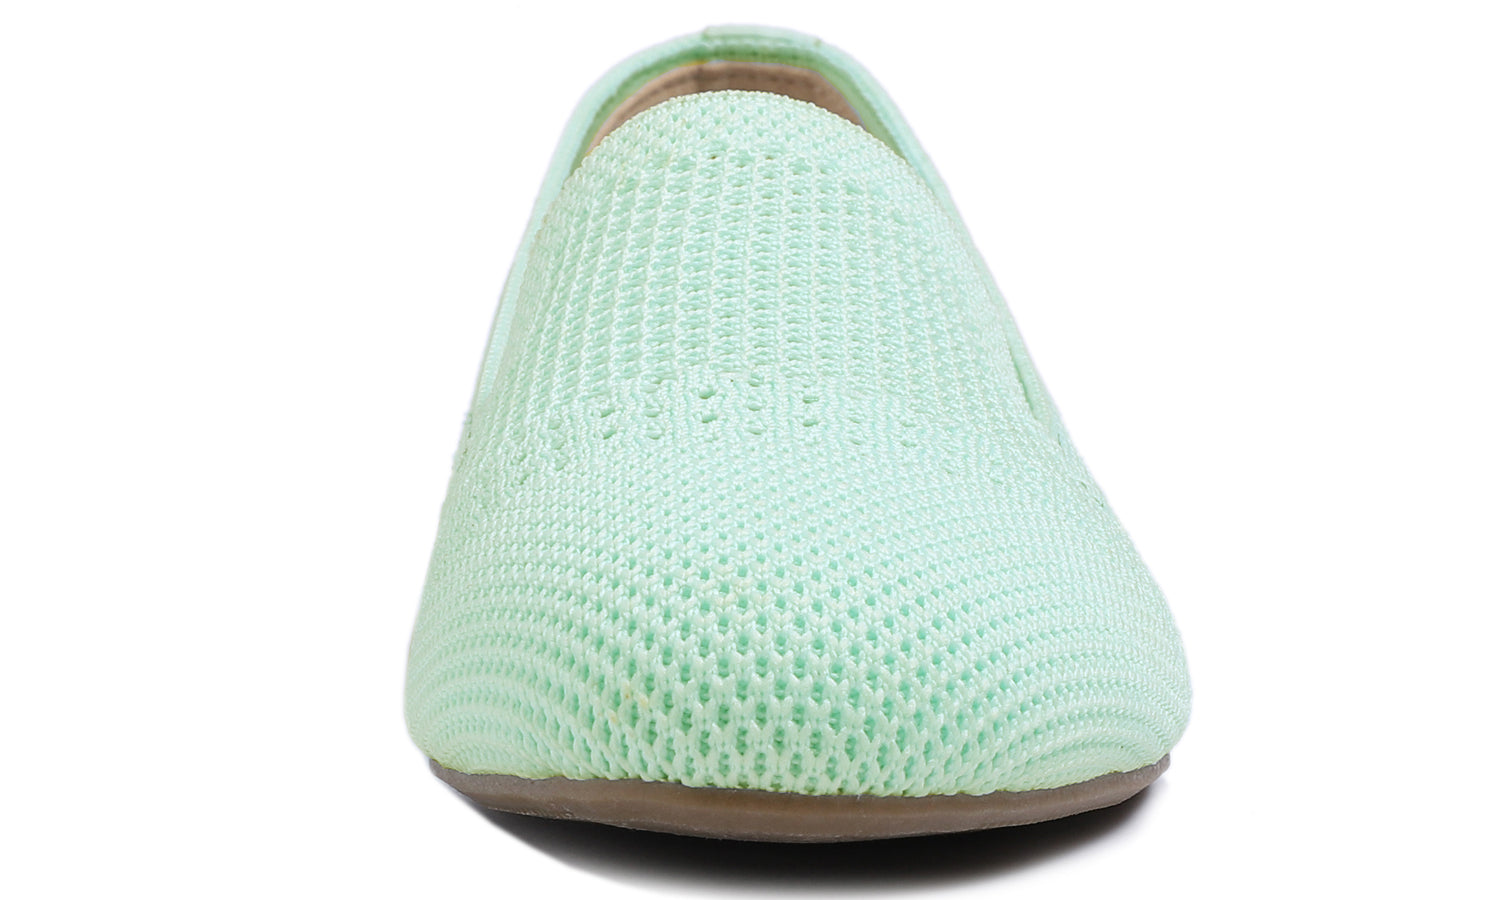 Feversole Women's Woven Fashion Breathable Knit Flat Shoes Mint Green Loafer